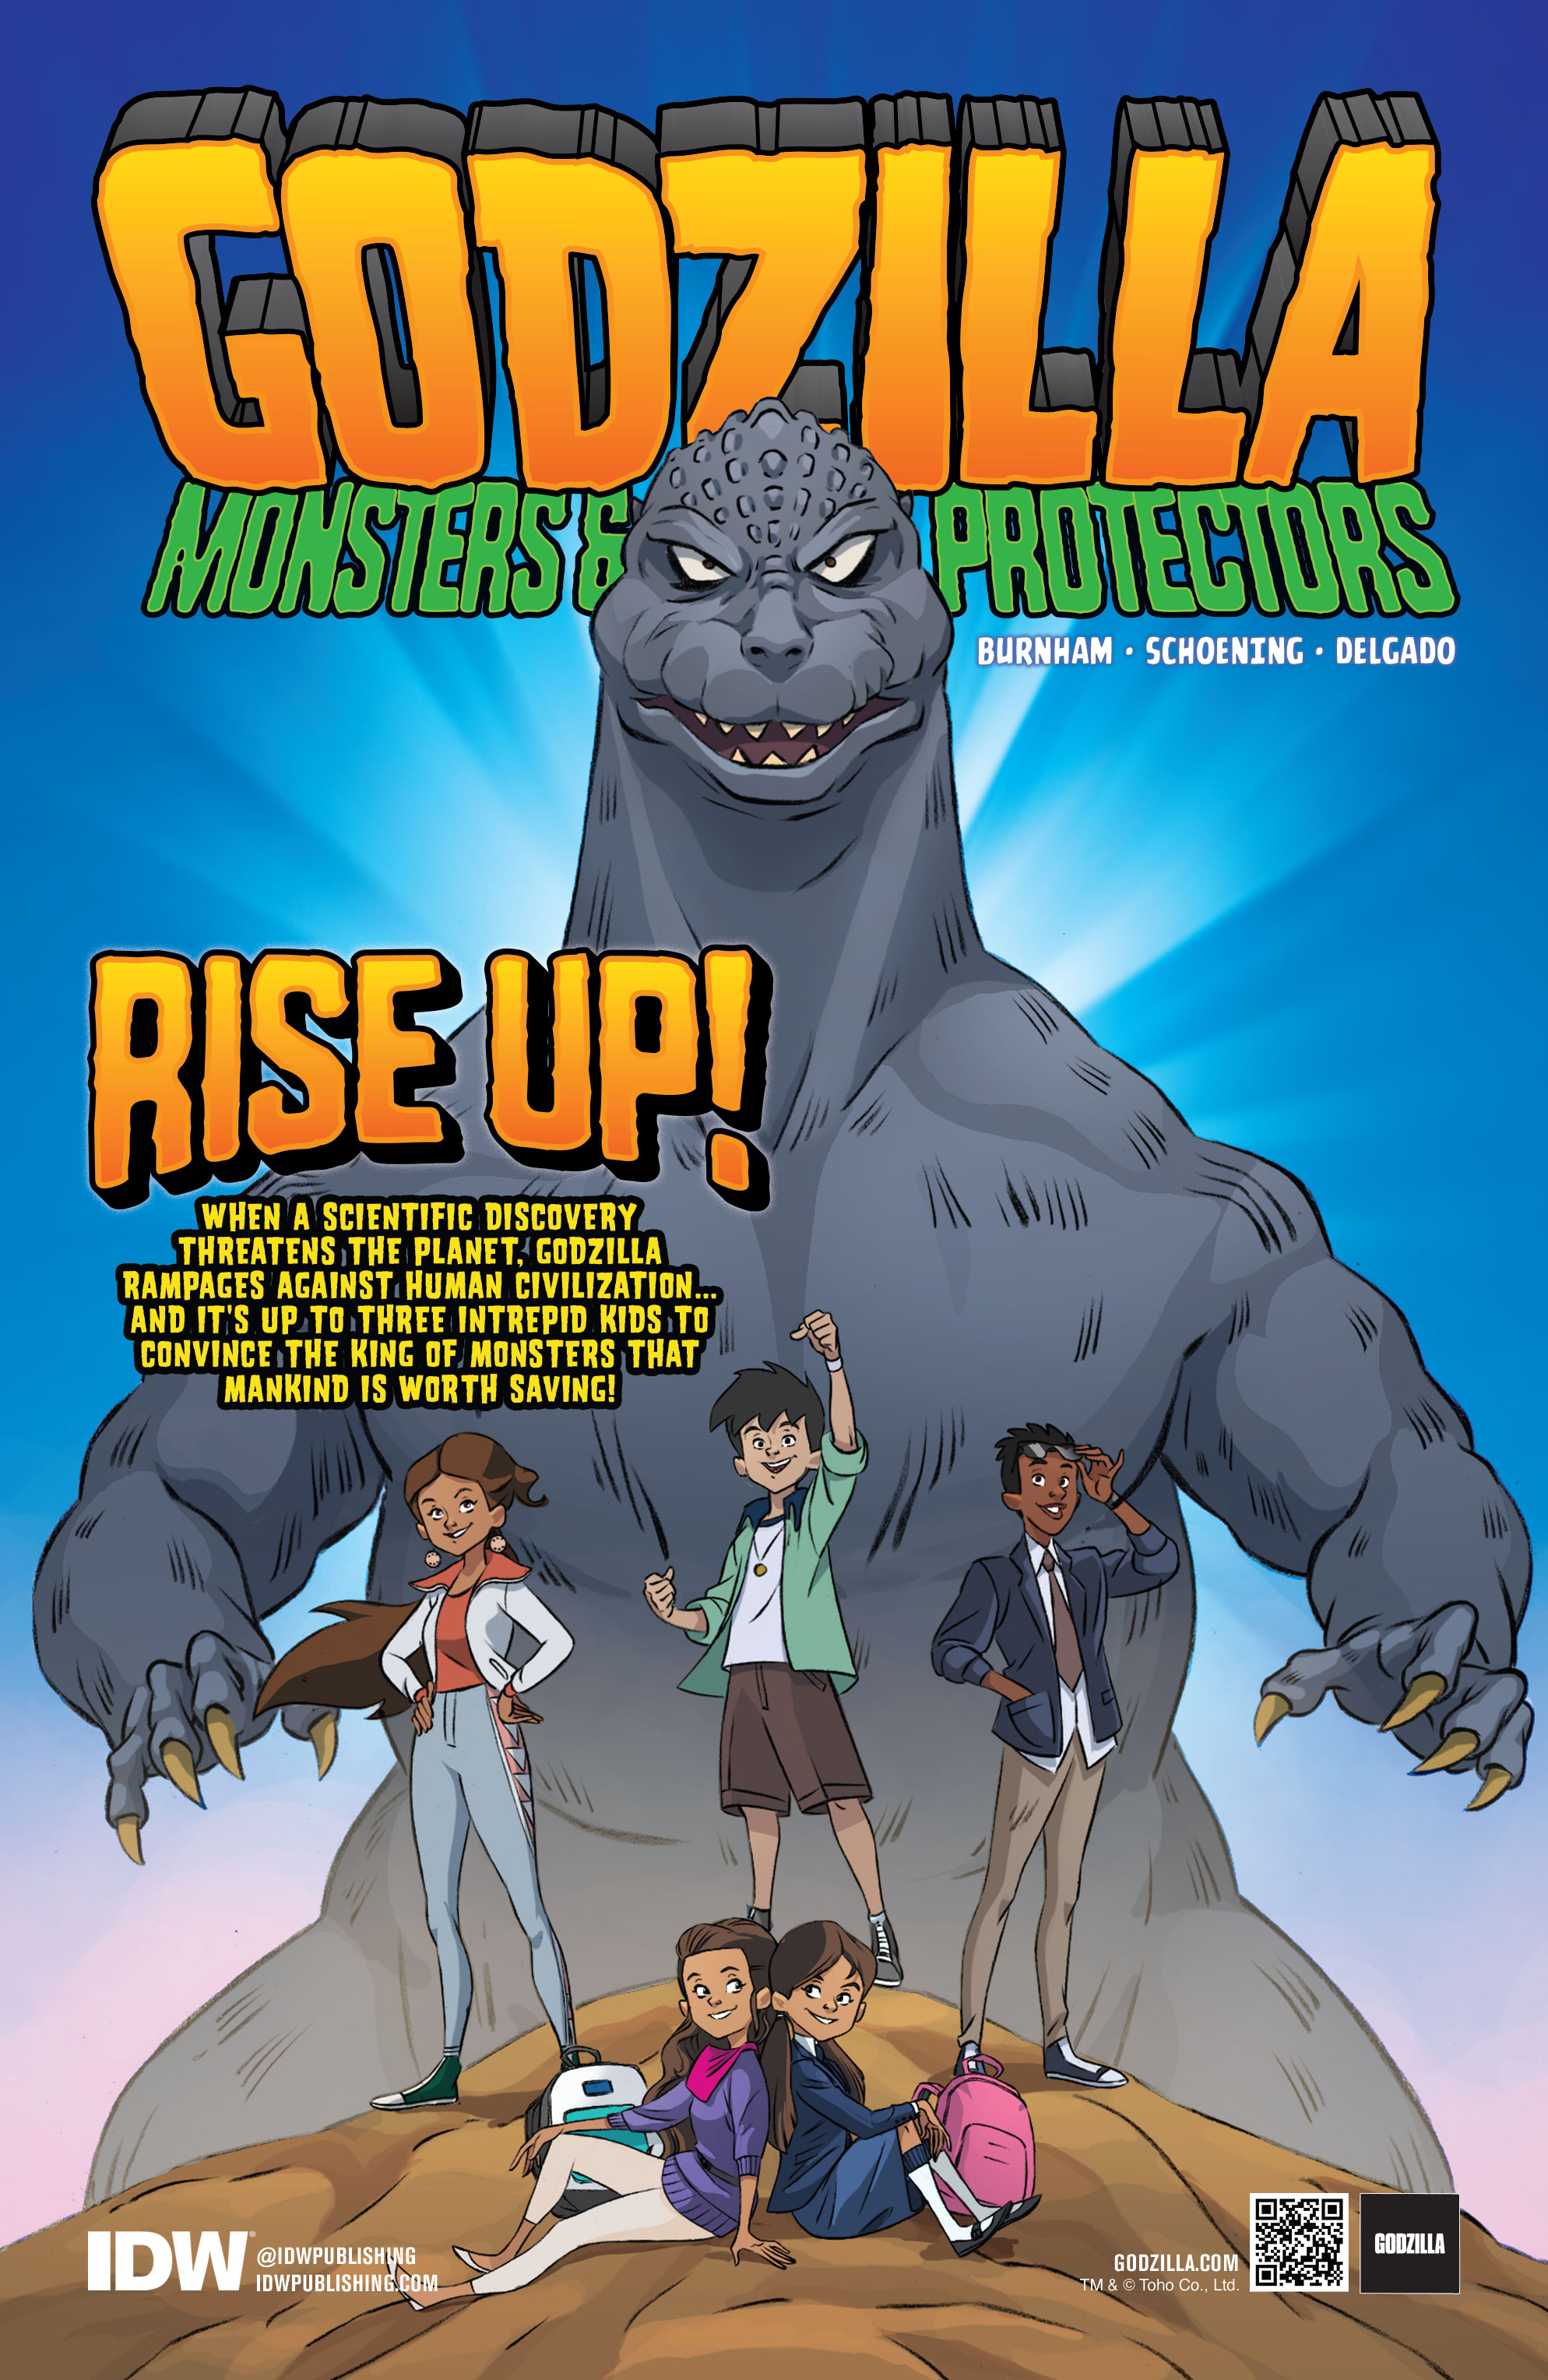 Read online Godzilla: Monsters & Protectors - All Hail the King! comic -  Issue #3 - 27